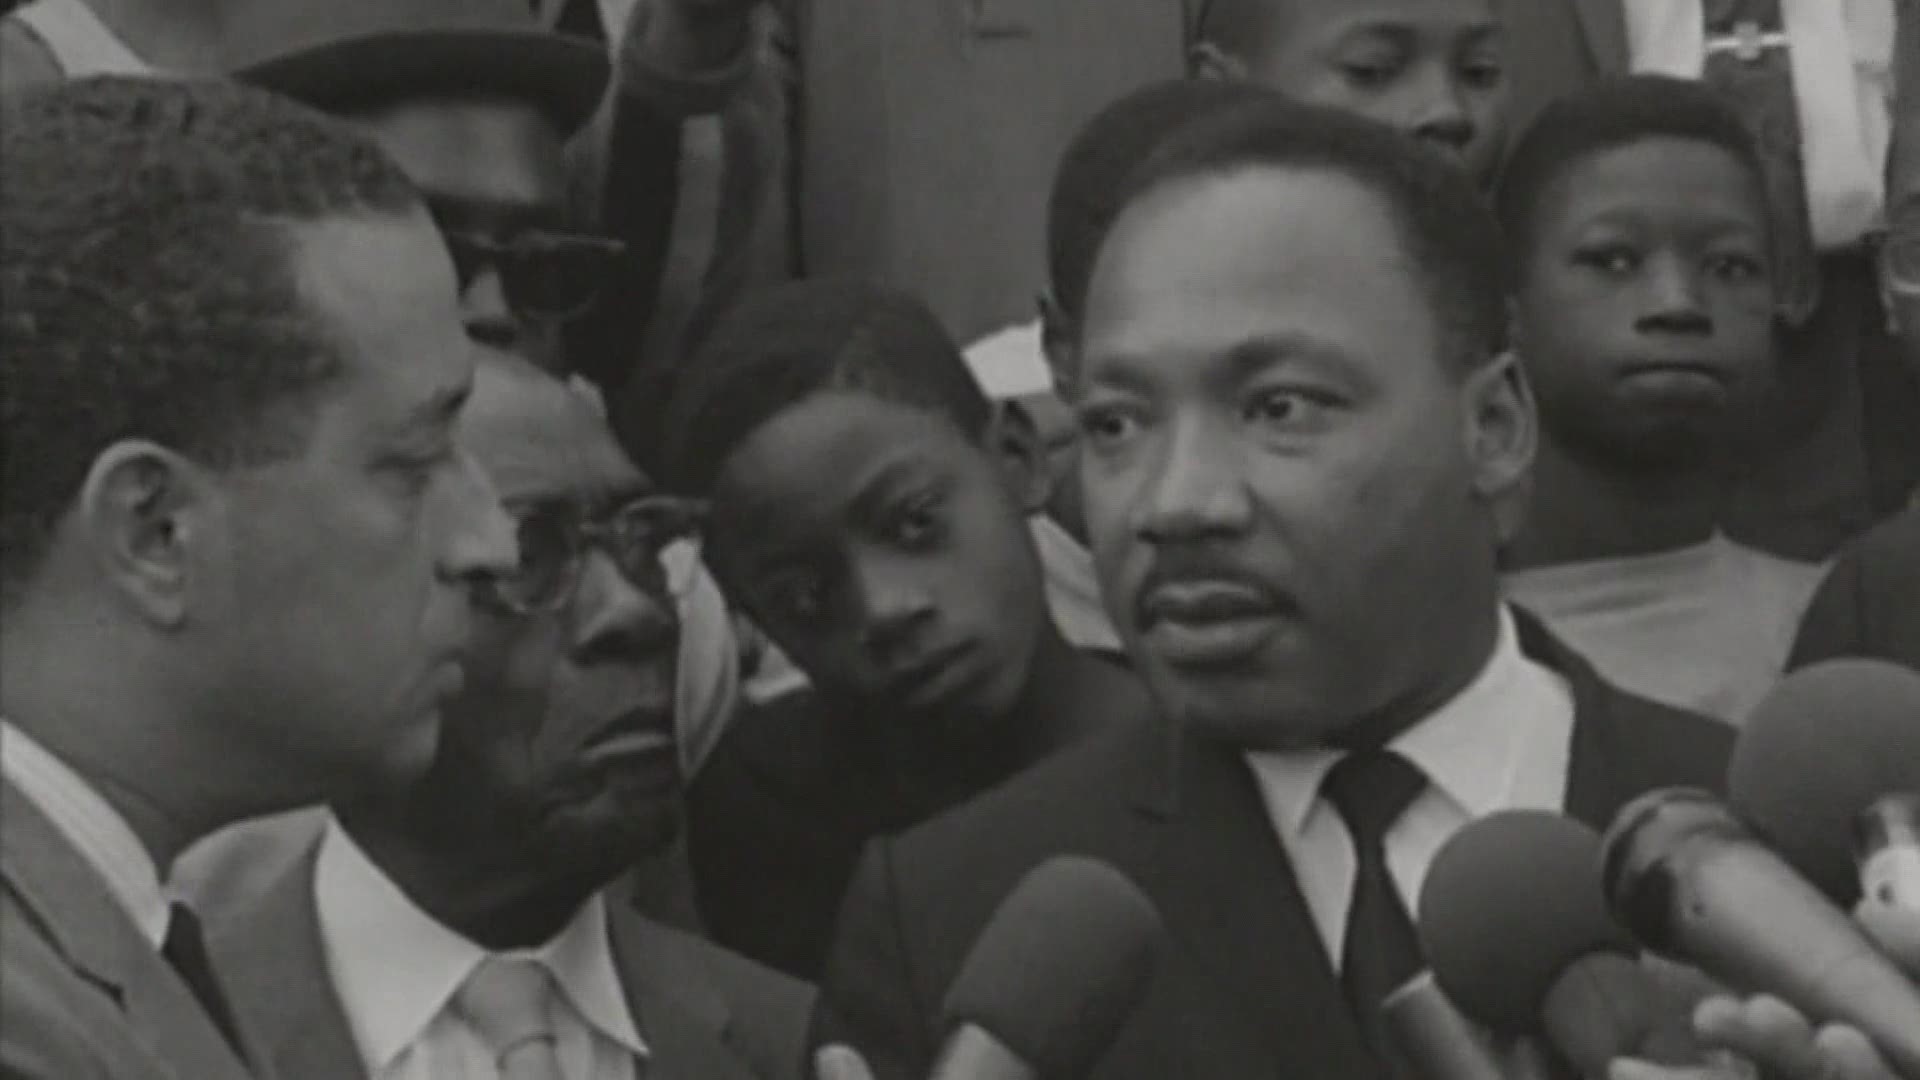 Across the state, meetings and discussions on racial issues both past and present took place in honor of MLK, and all that he did for civil rights.